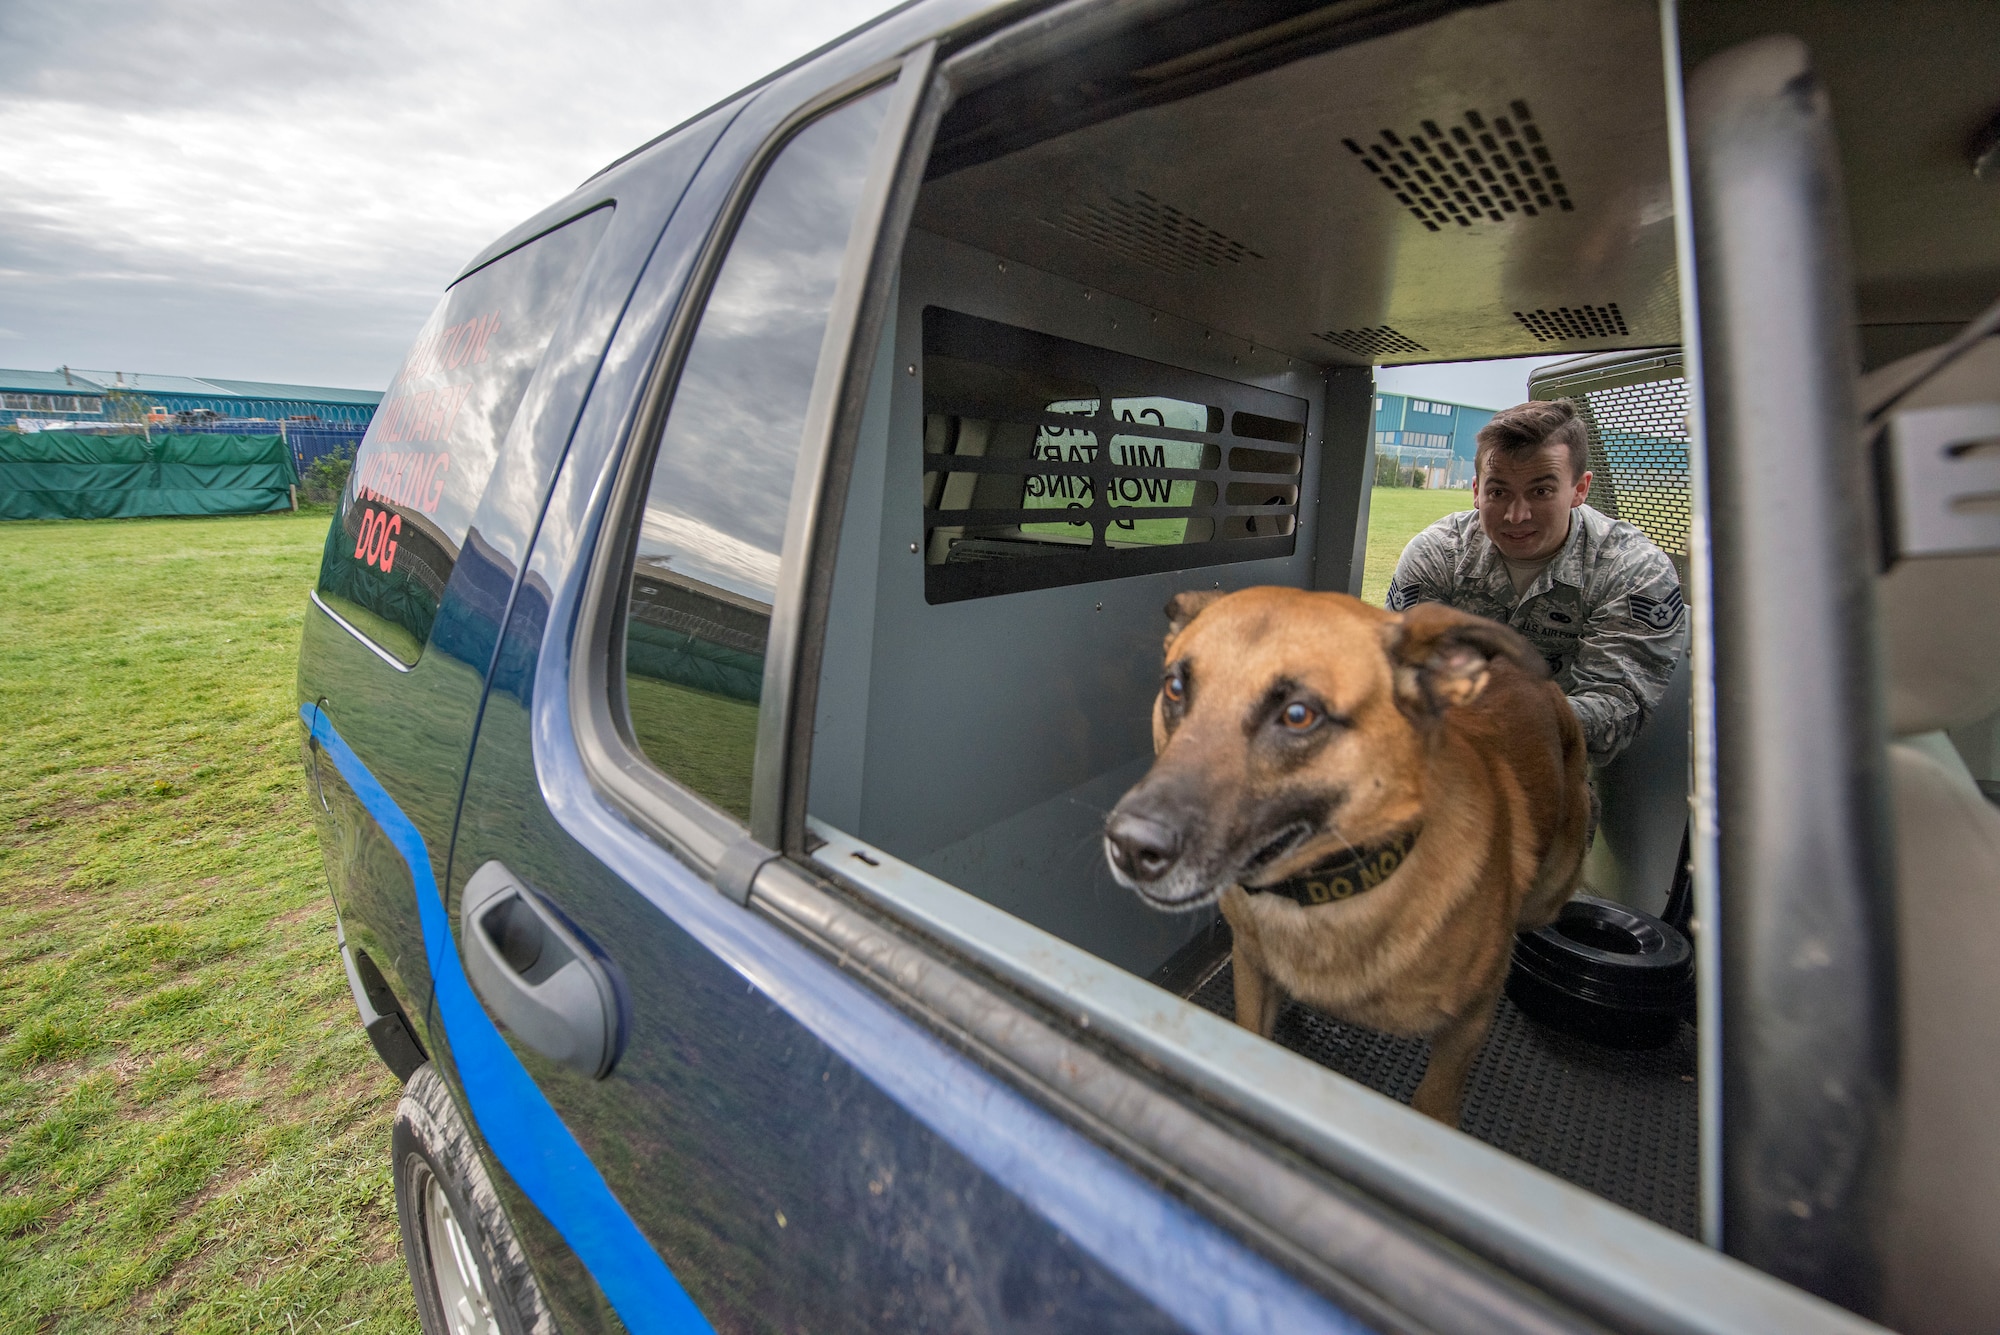 U.S. Air Force Staff Sgt. Camron Quaranto, 100th Security Force Squadron Military Working Dog Handler and MWD Tomi practice jumping out of a vehicle as part of their daily training at RAF Mildenhall, England, Nov. 6, 2018. The MWD teams implement use of force training on a daily basis, also known as “six-phases of aggression.” (U.S. Air Force photo by Staff Sgt. Christine Groening)